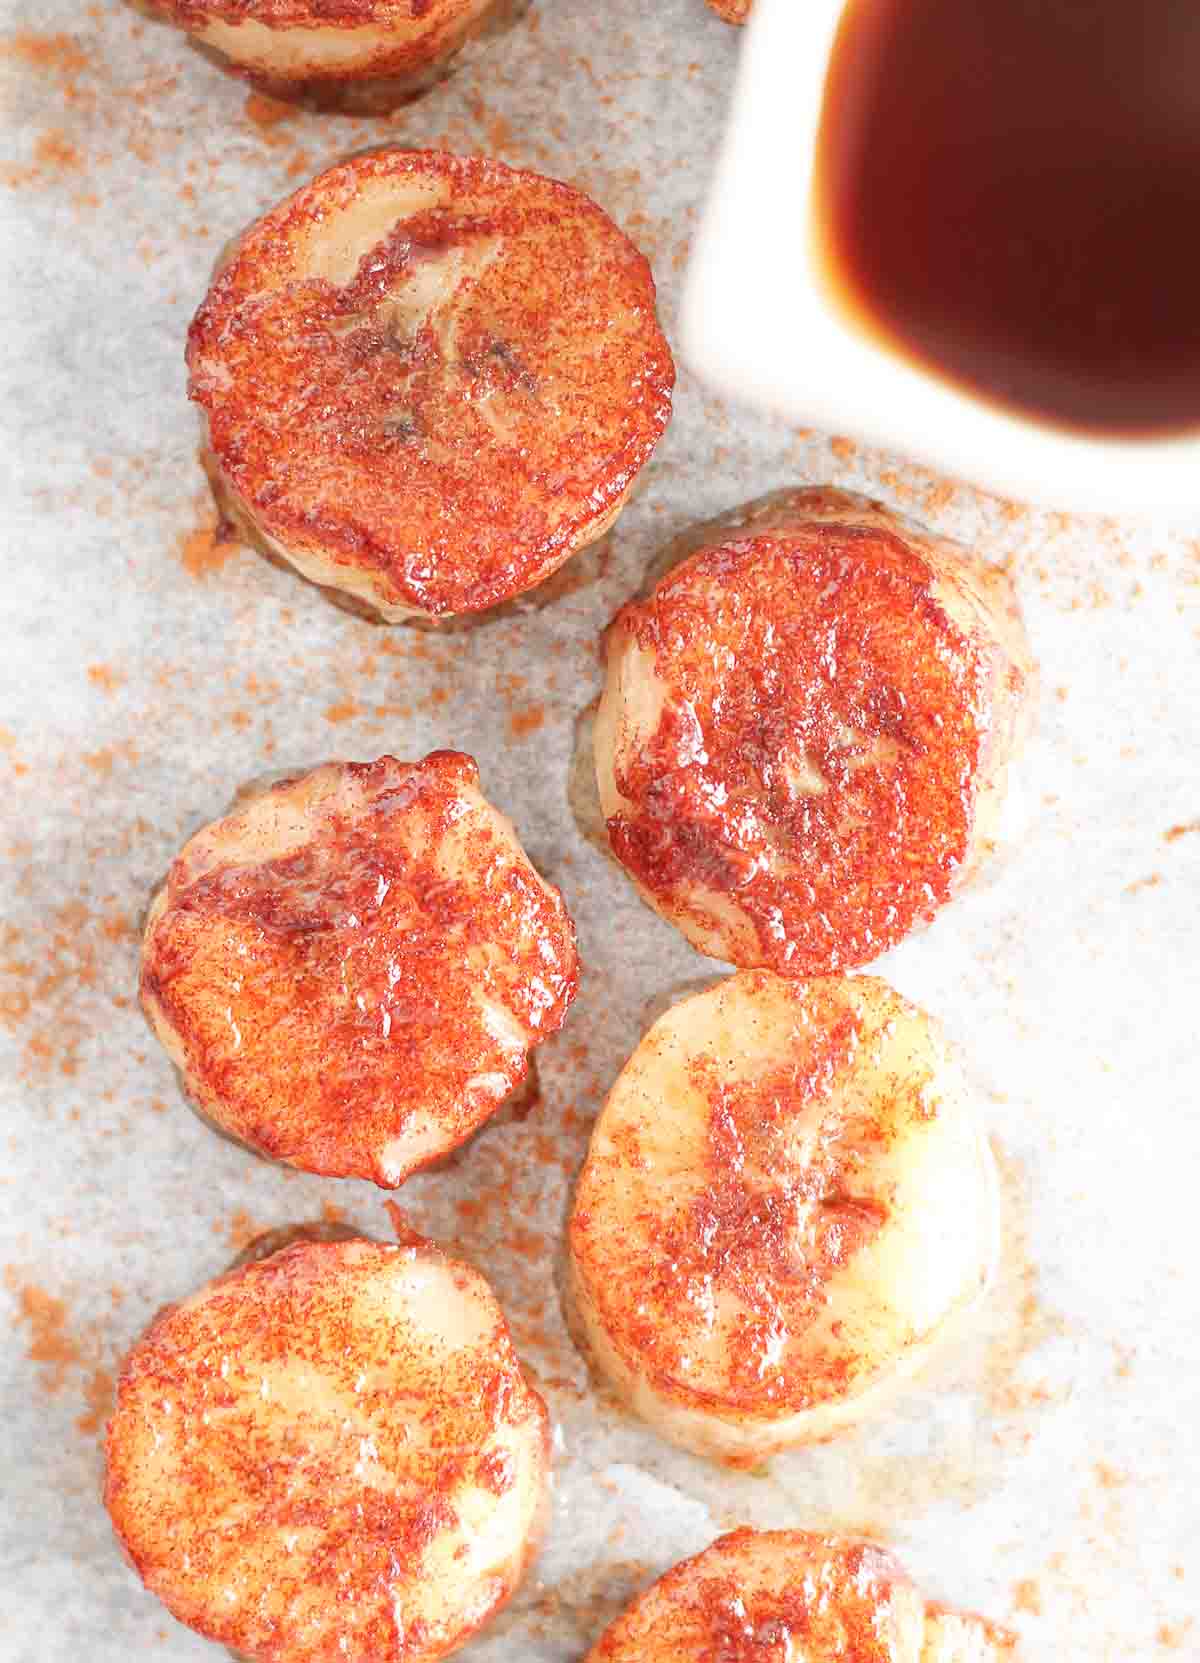 Fried Bananas - Pan Fried + No Sugar Added - The Honour System